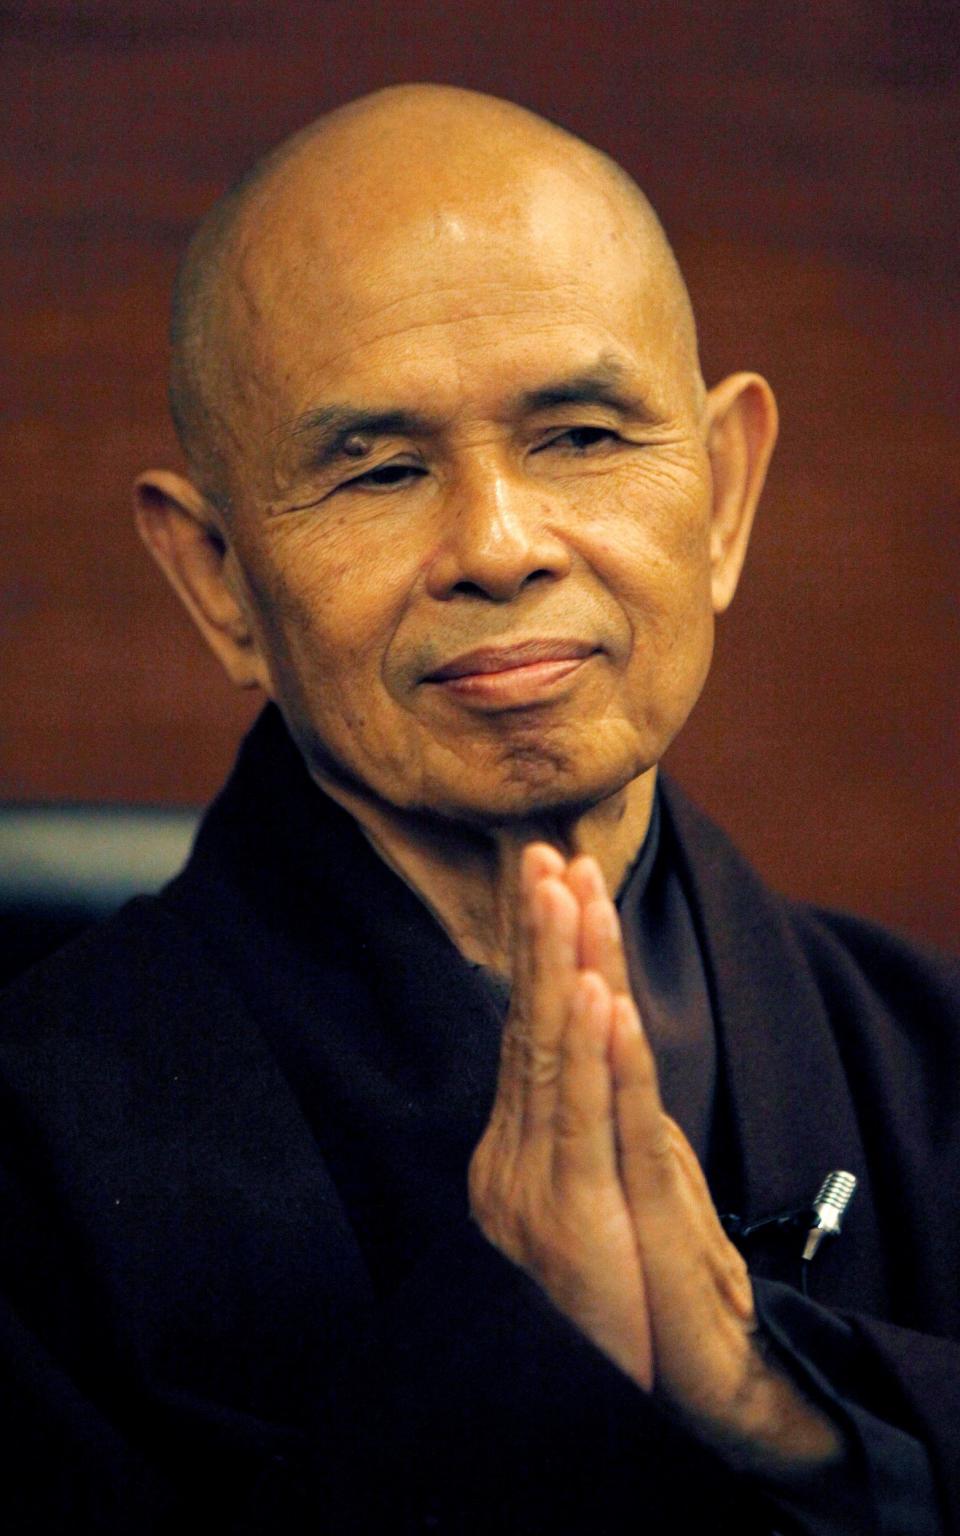 Thich Nhat Hanh in Bangkok, 2010 - REUTERS/Chaiwat Subprasom/File Photo